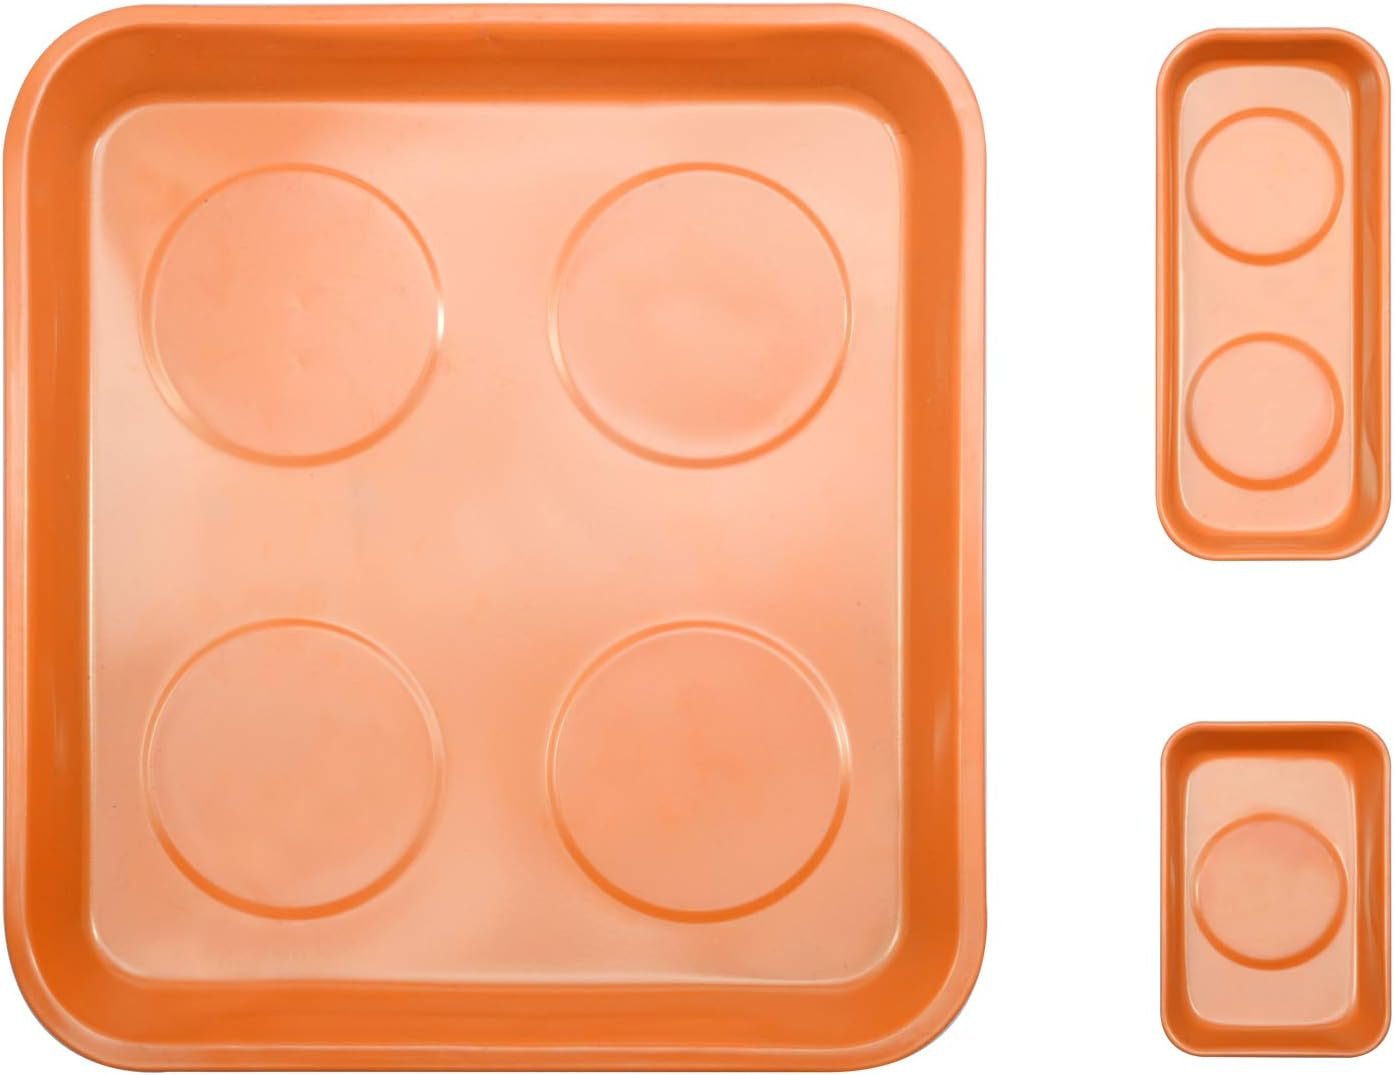 3-Piece Magnet Trays Set Review